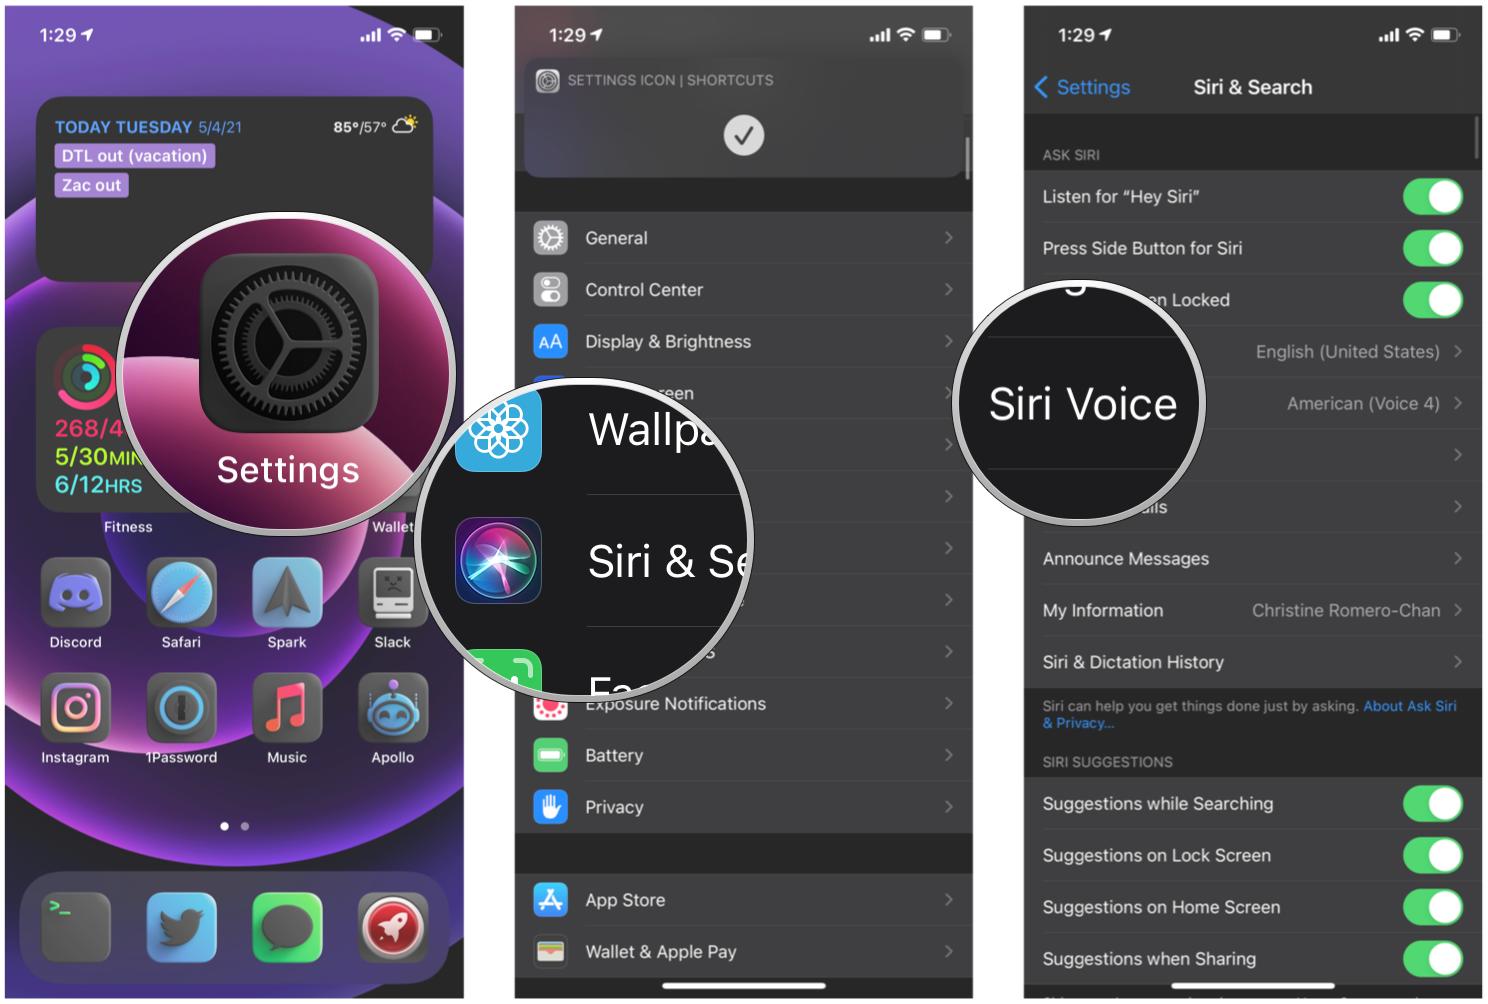 How to change Siri's voice on iPhone by showing: Launch Settings, tap Siri & Search, tap Siri Voice